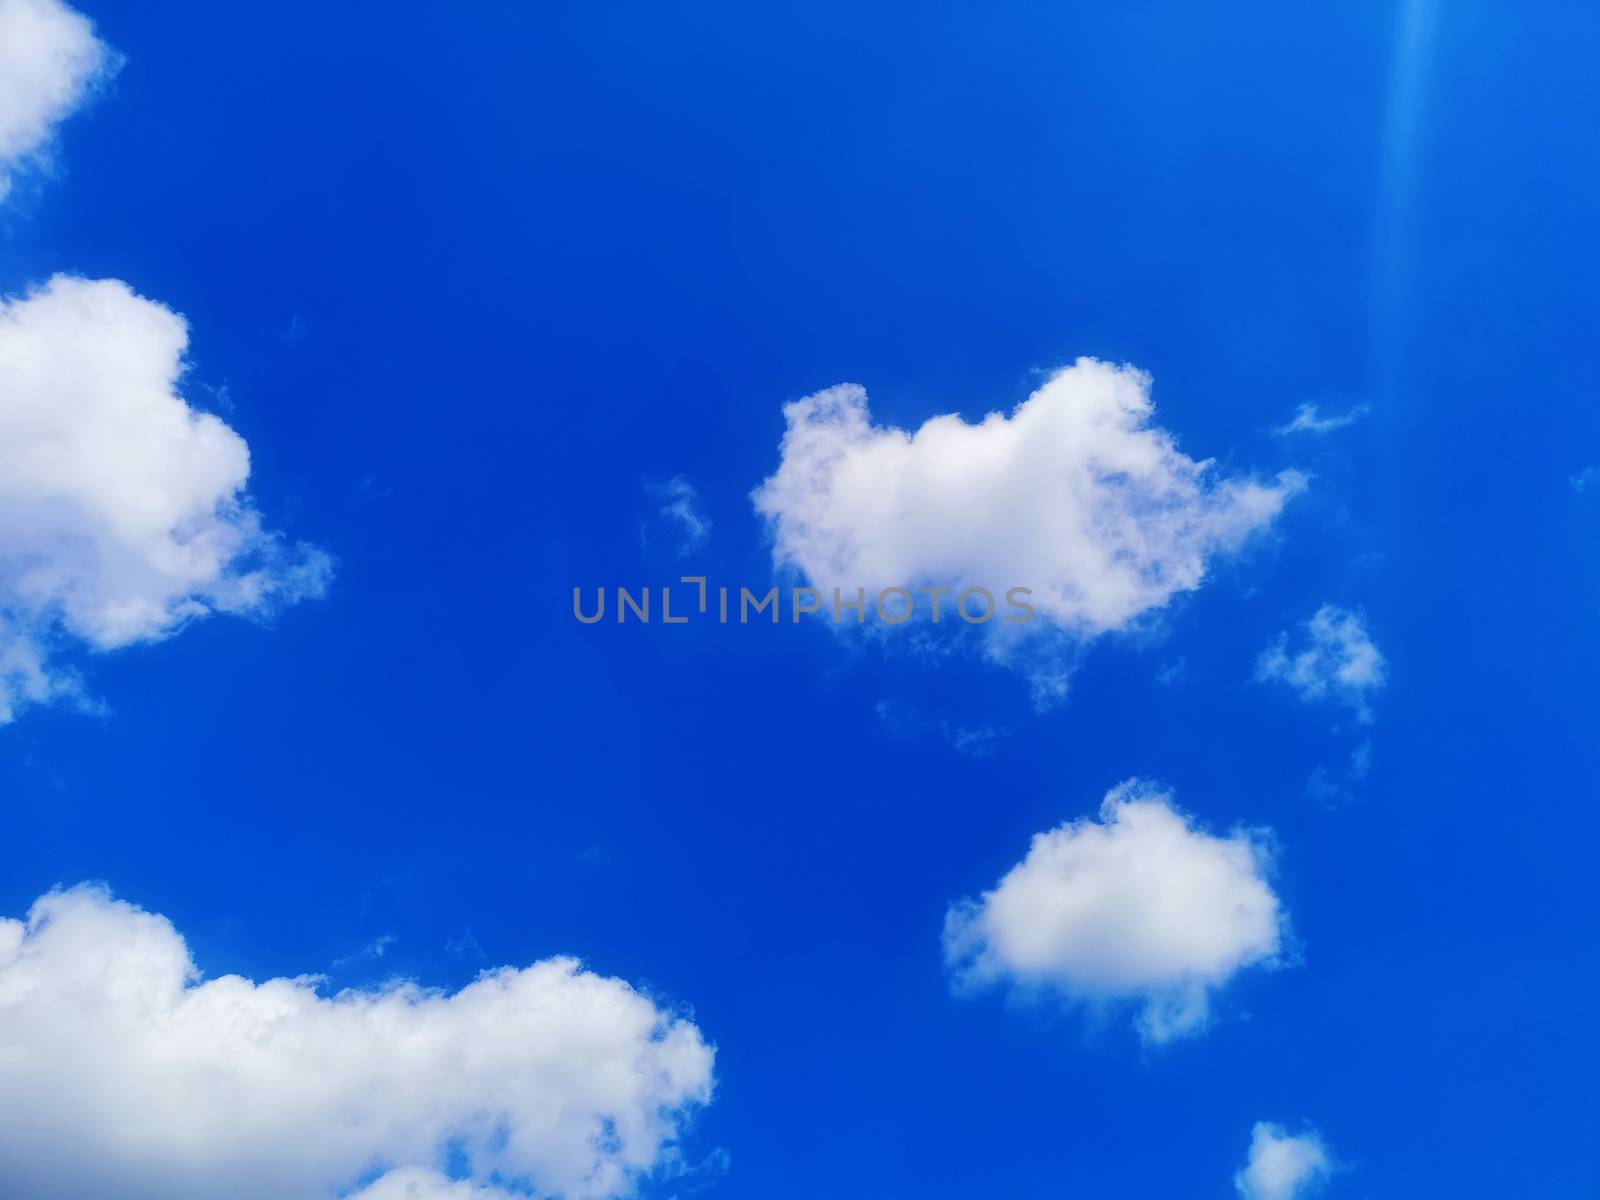 Beautiful blue sky and clouds natural background by galinasharapova